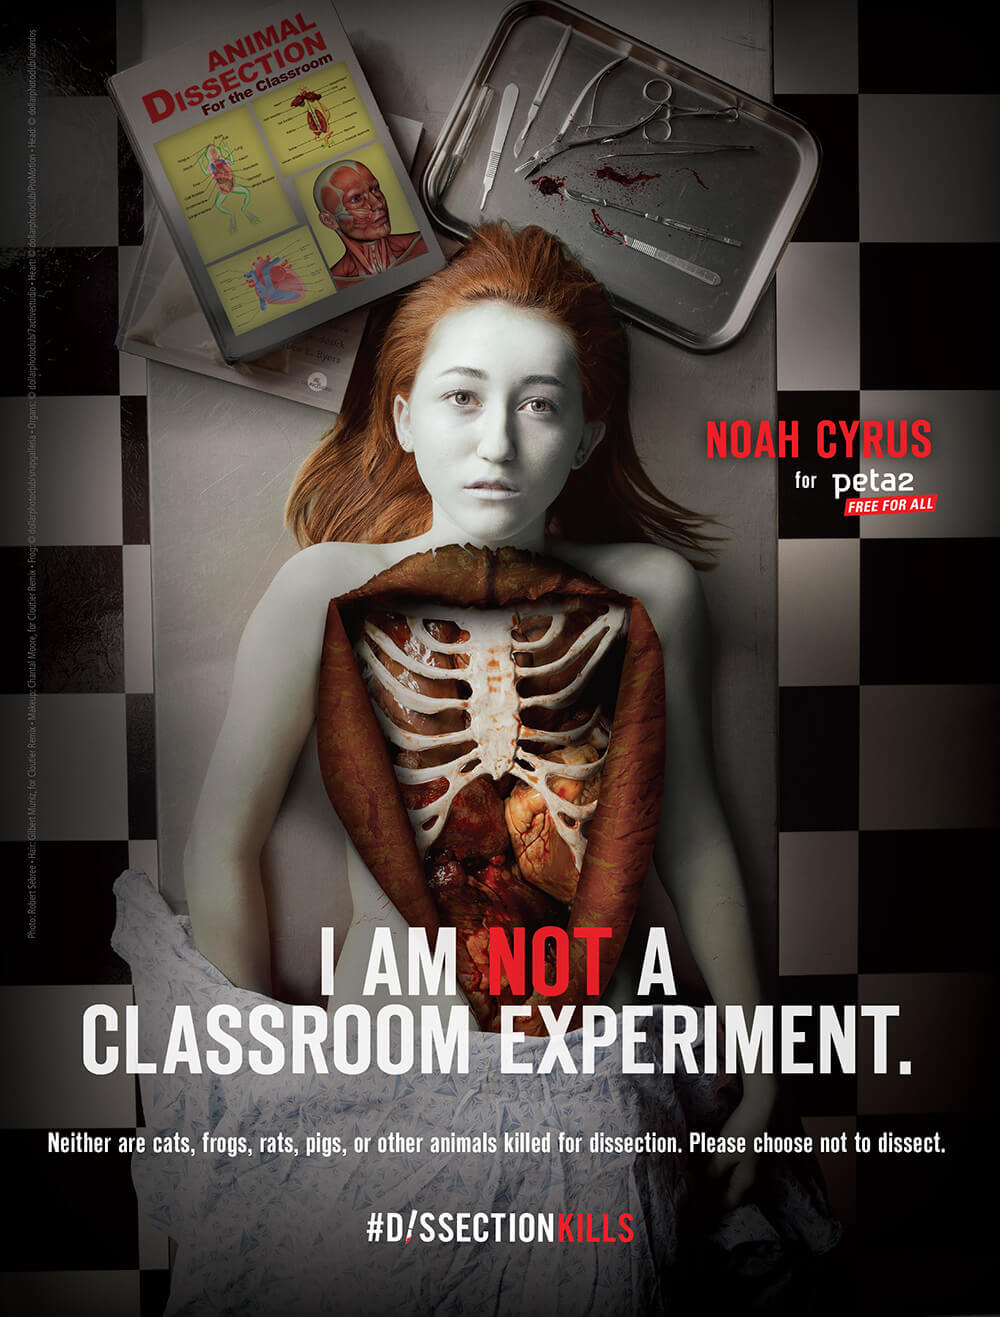 #DissectionKills With Noah Cyrus